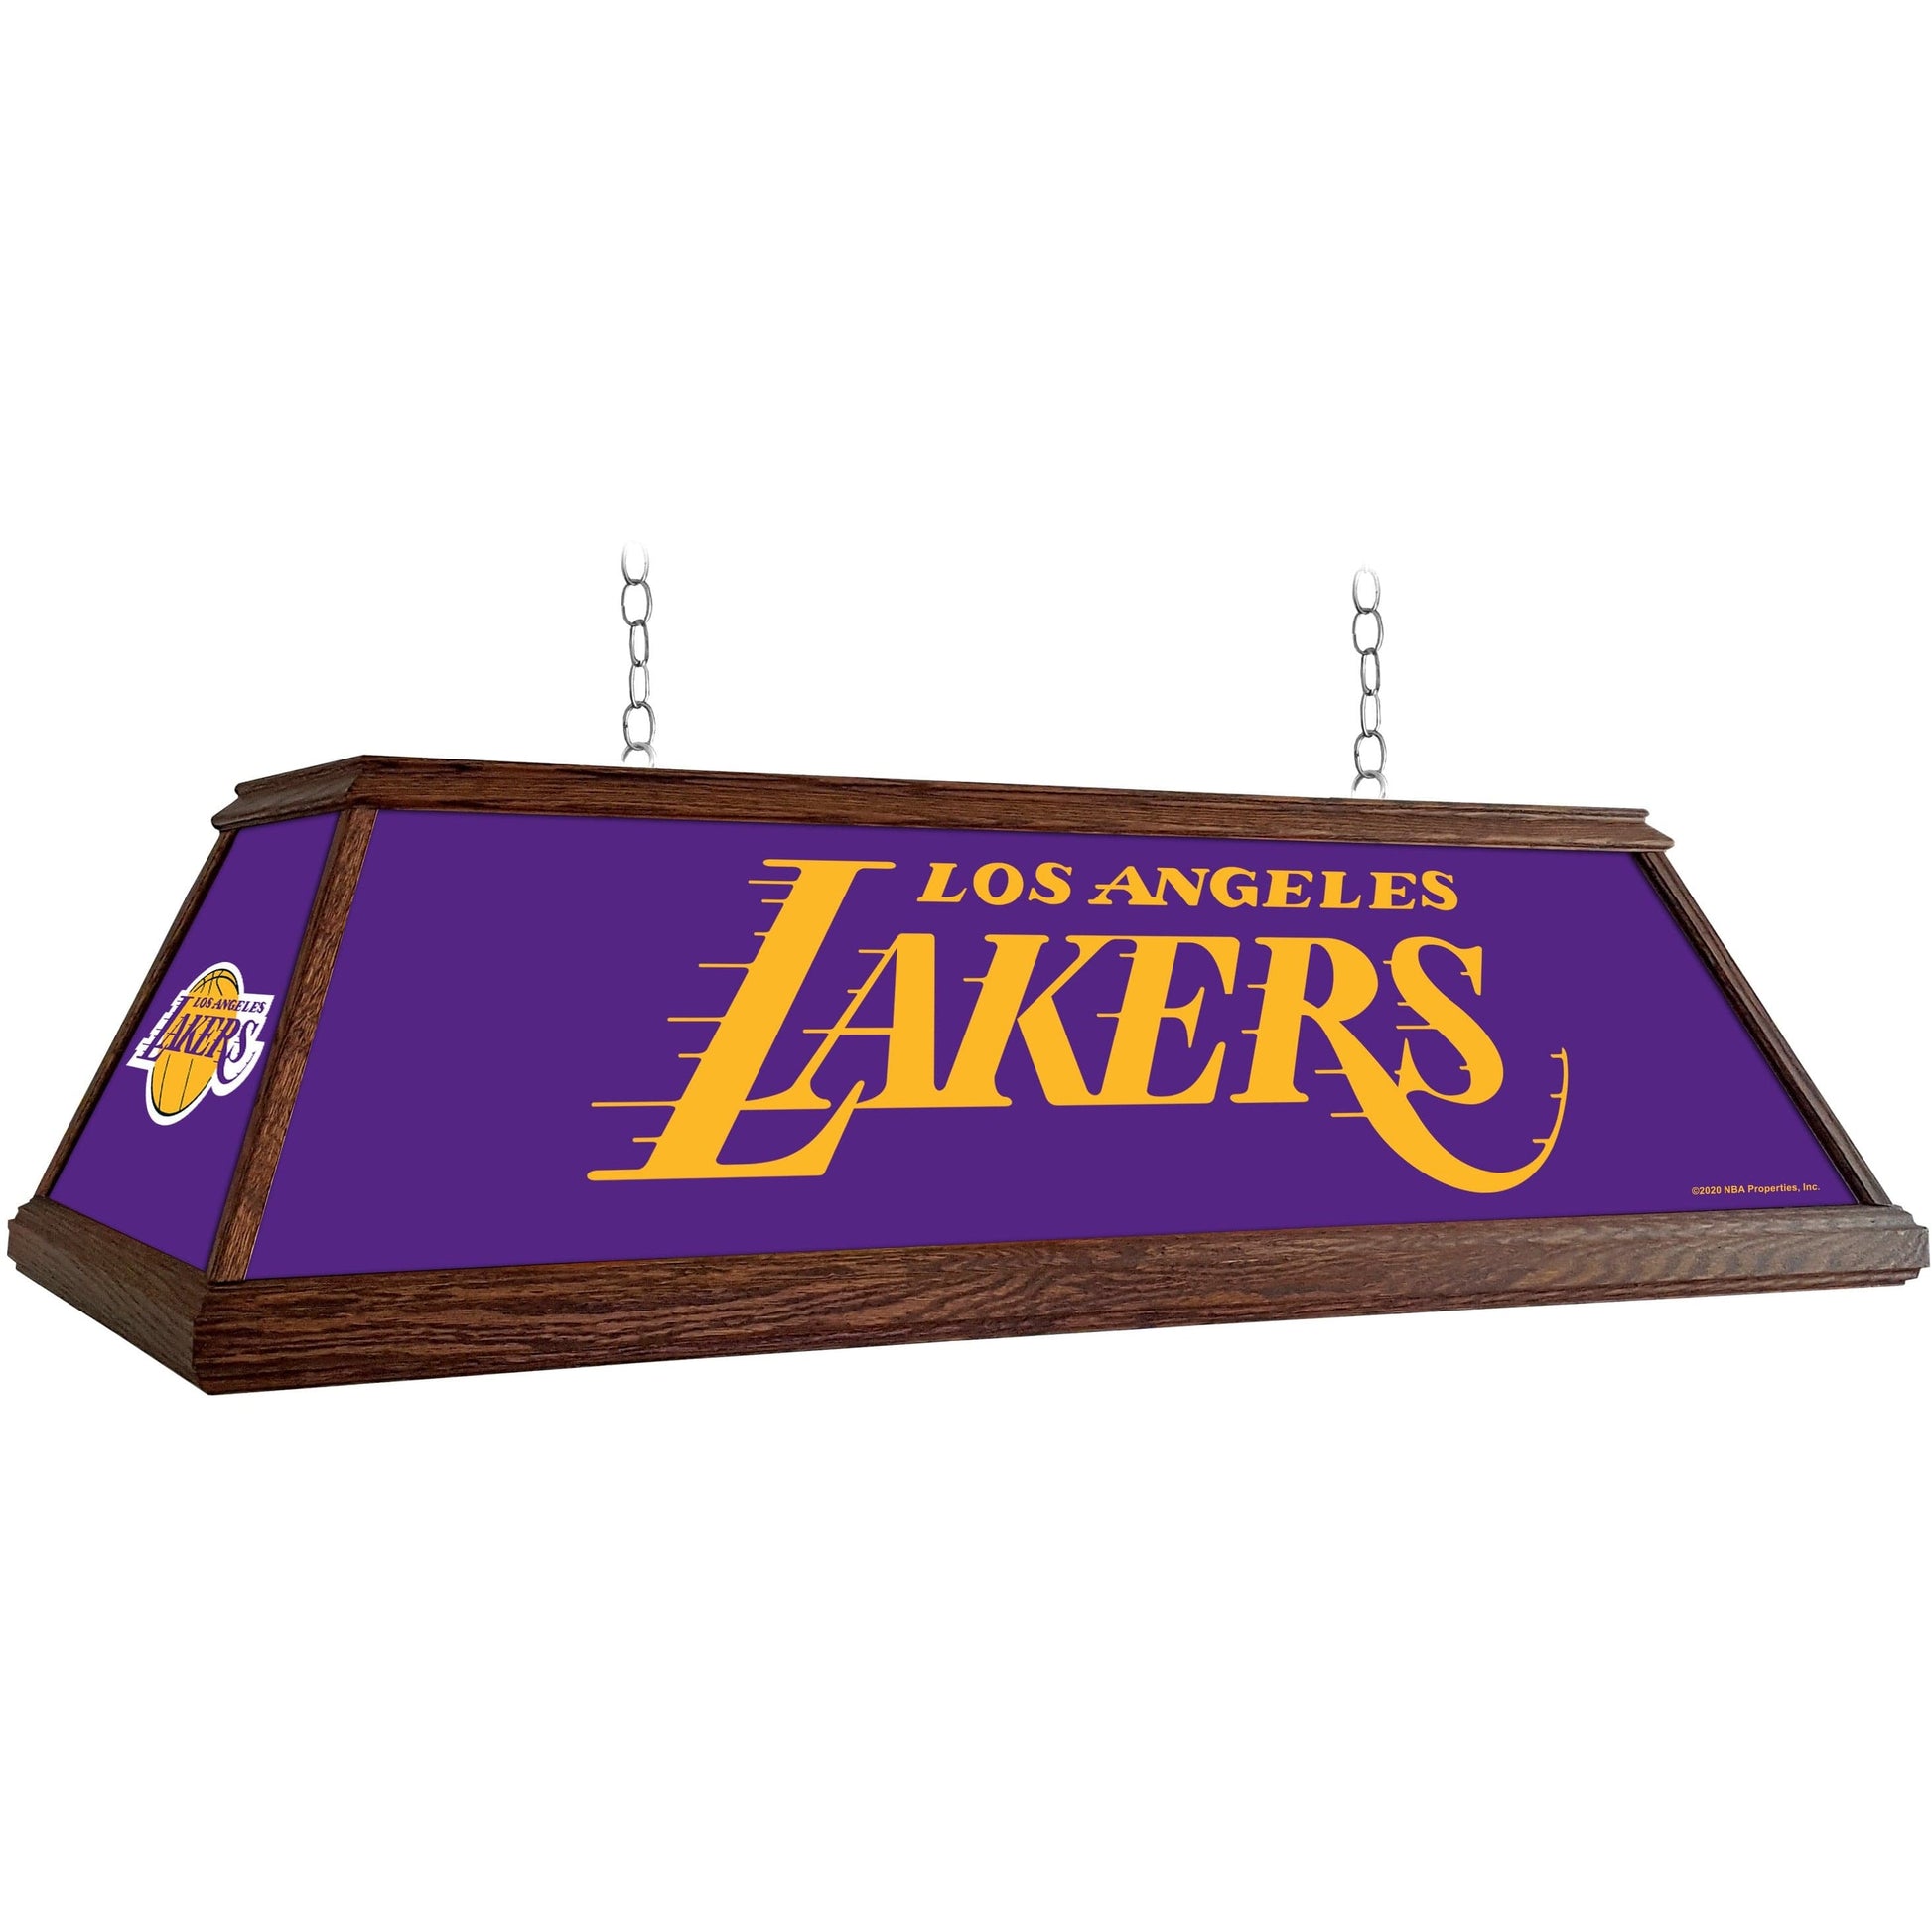 Los Angeles Lakers: Premium Wood Pool Table Light - The Fan-Brand